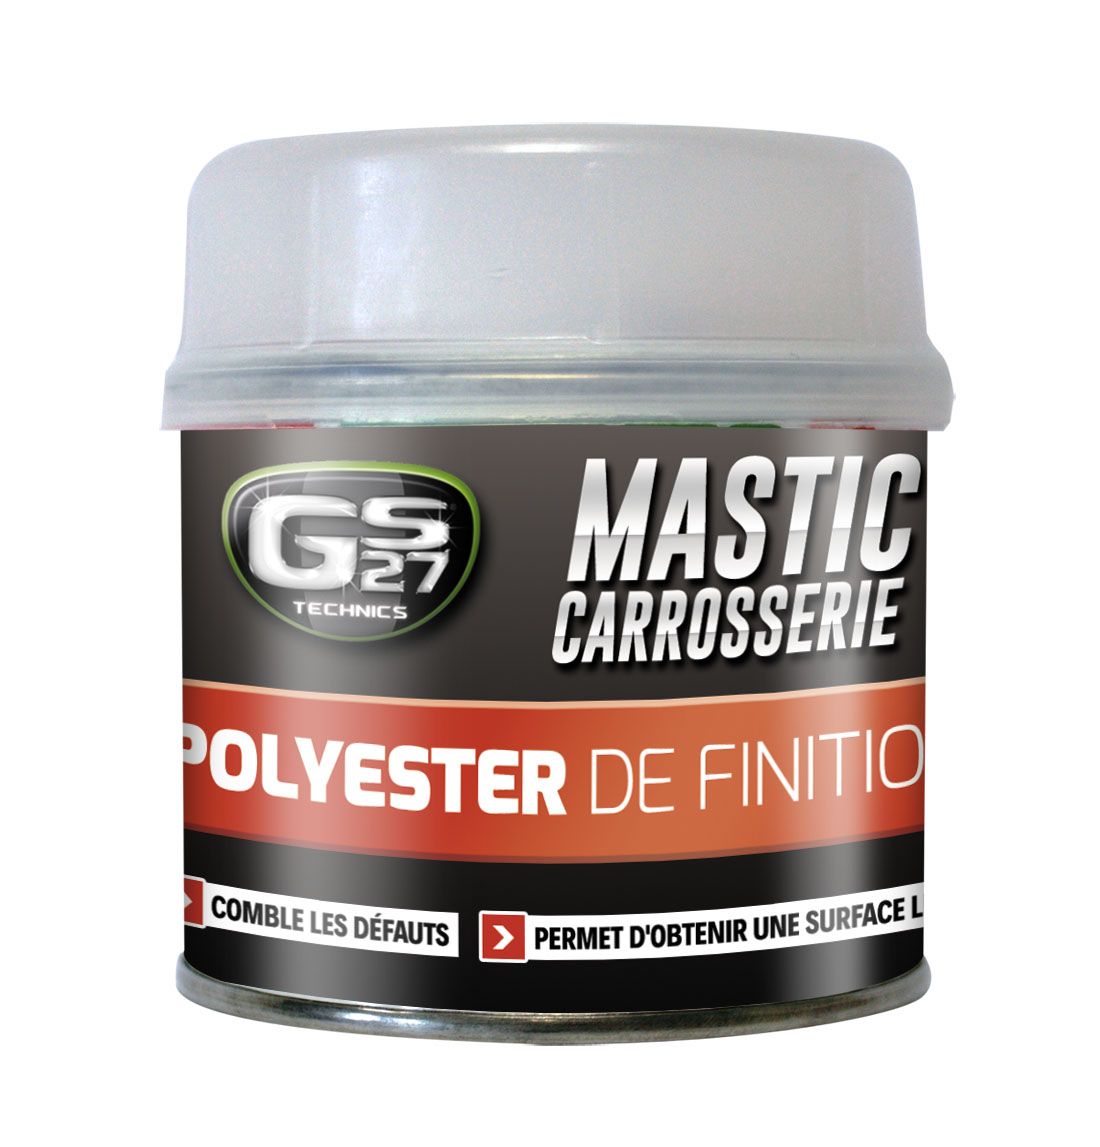 Mastic Polyester de finition – Mastic polyester carrosserie pour